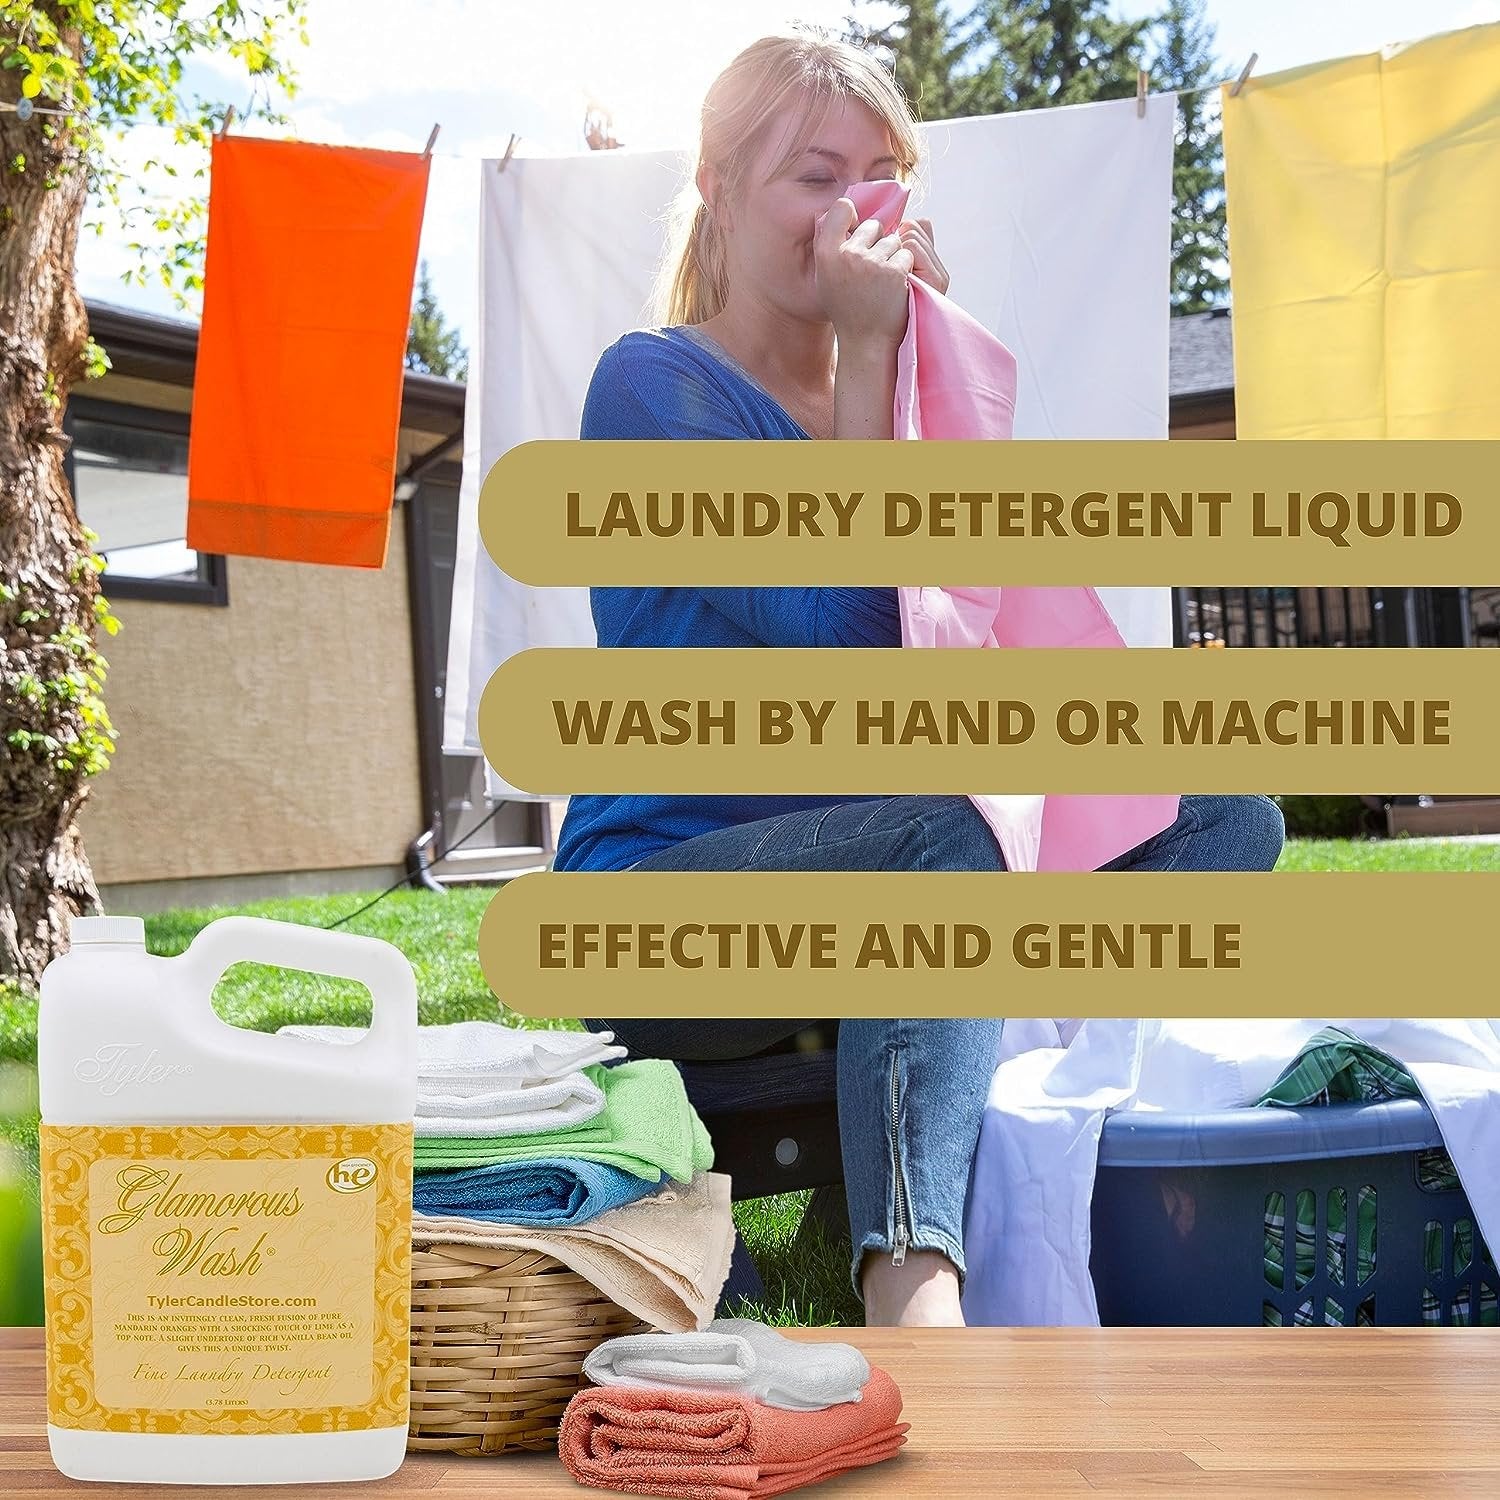 Worldwide Nutrition Bundle, 2 Items: Tyler Glamorous Wash Wishlist Scent Fine Laundry Liquid Detergent - Hand and Machine Washable - 3.78L (1Gallon) Container and Multi-Purpose Key Chain